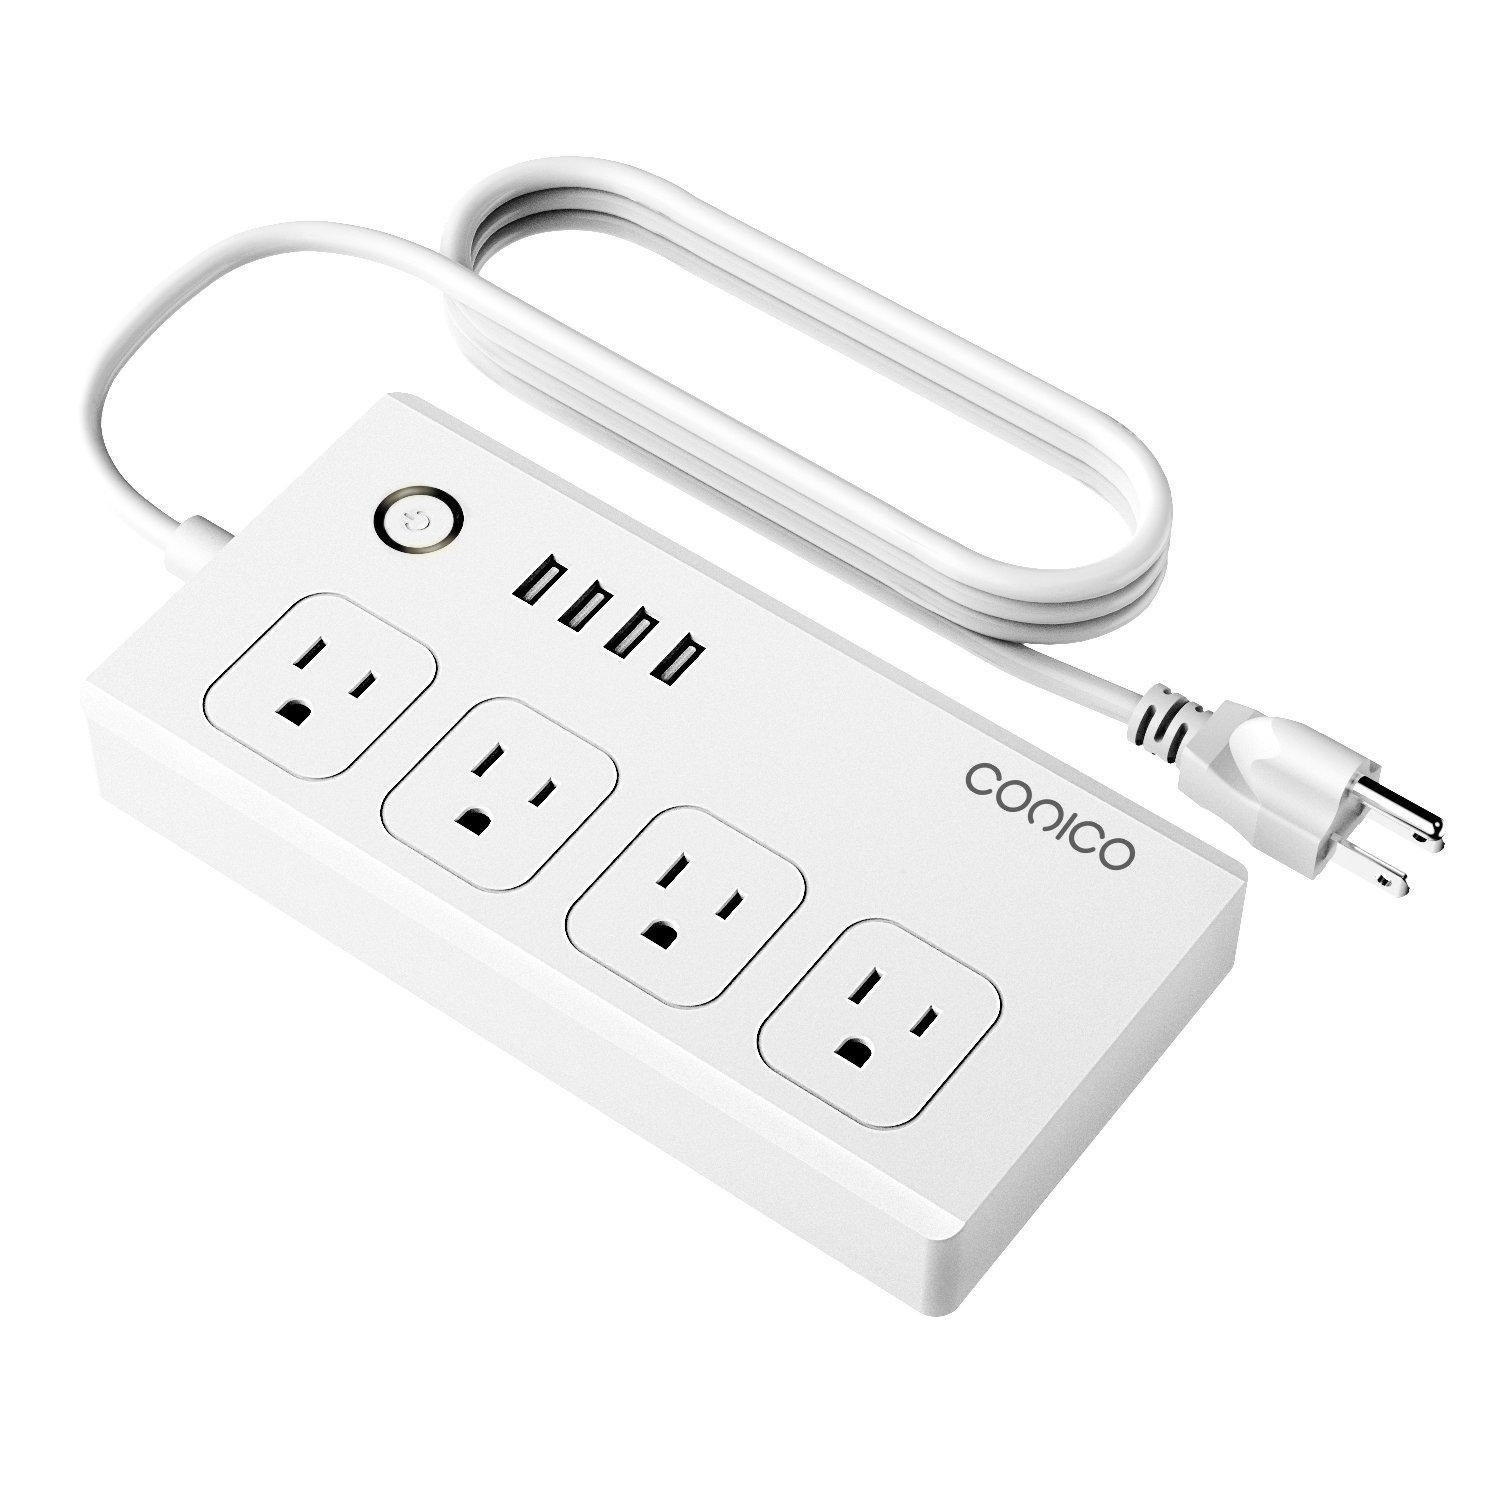 Conico 4-outlet 4-port smart power strip for $24 with code